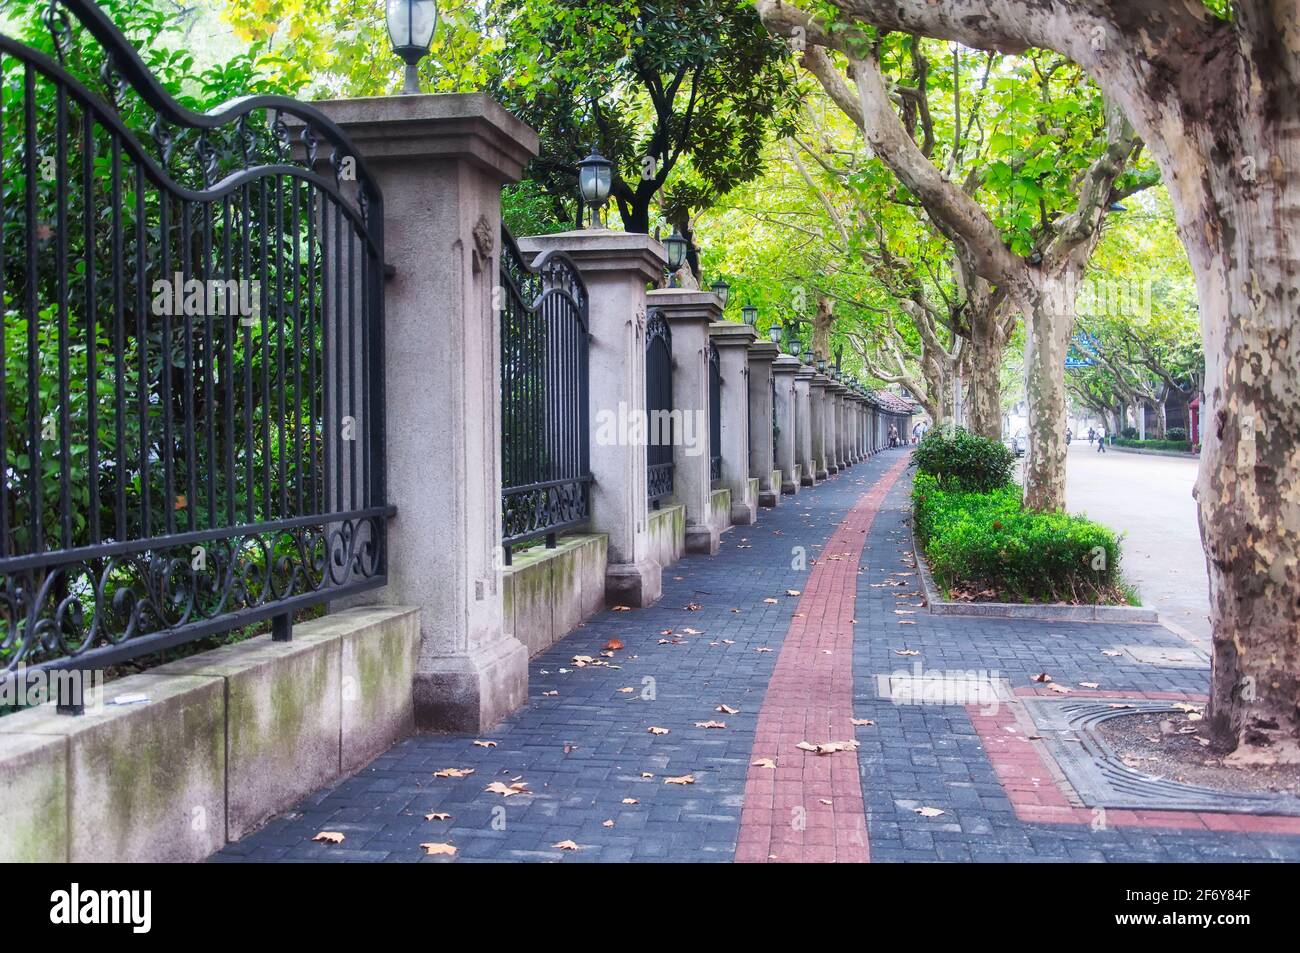 A wrought iron fence and sycamore lined sidewalk in the french concession area of Puxi in shanghai china. Stock Photo